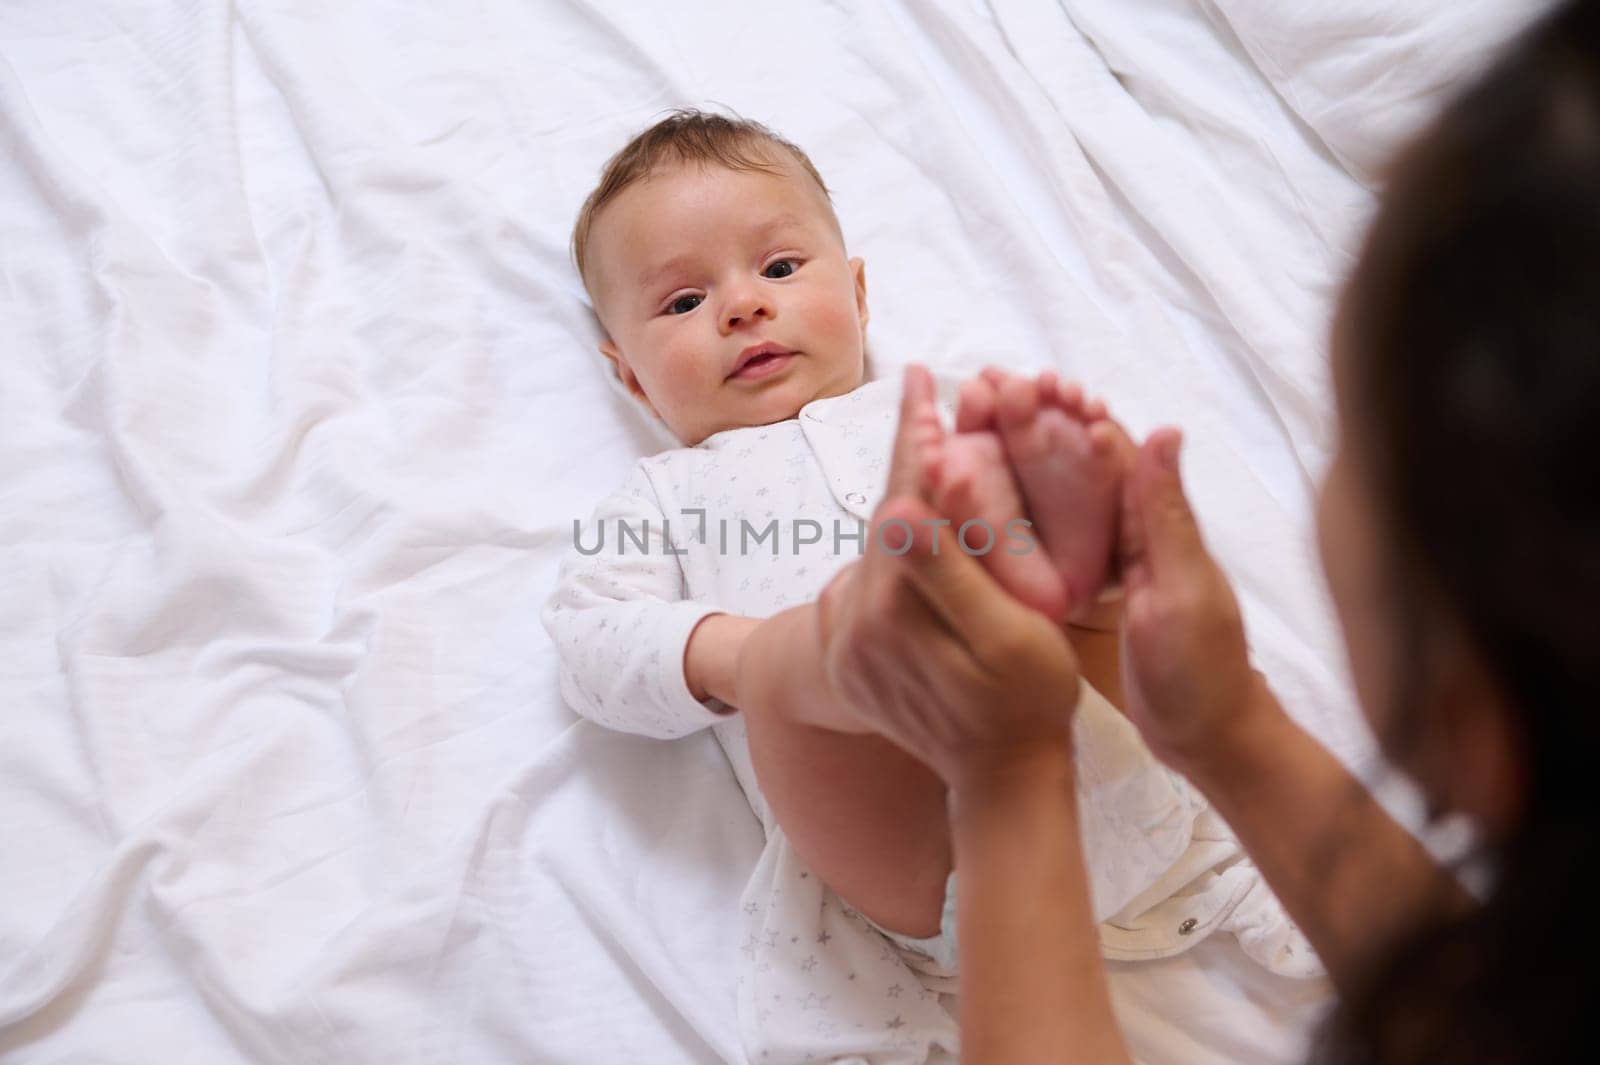 Adorable newborn baby looks at camera while his loving caring mom strokes and kisses his little feet and tiny toes by artgf